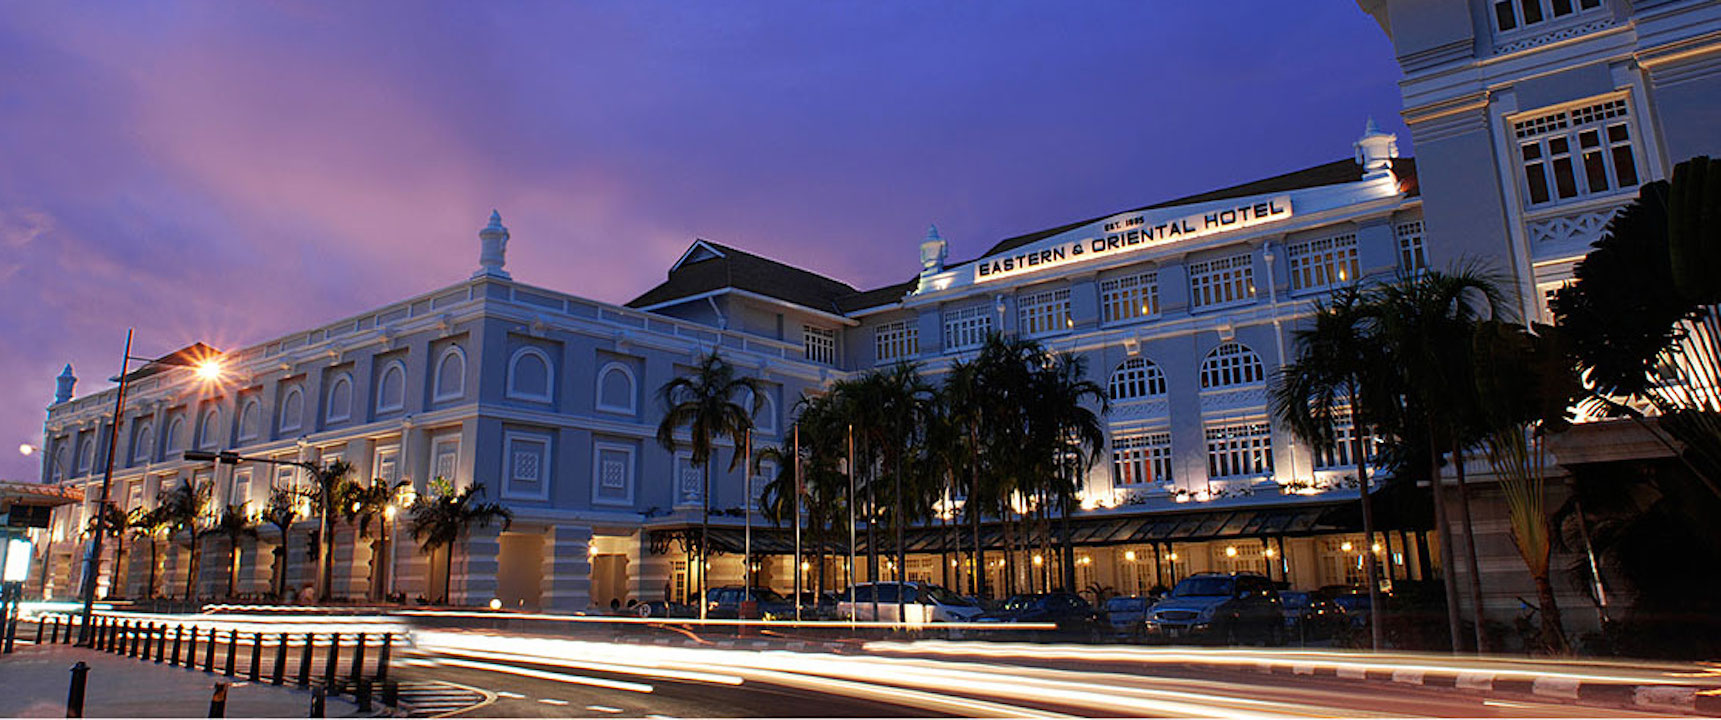 The Eastern & Oriental Hotel , George Town / Penang / Malaysia 